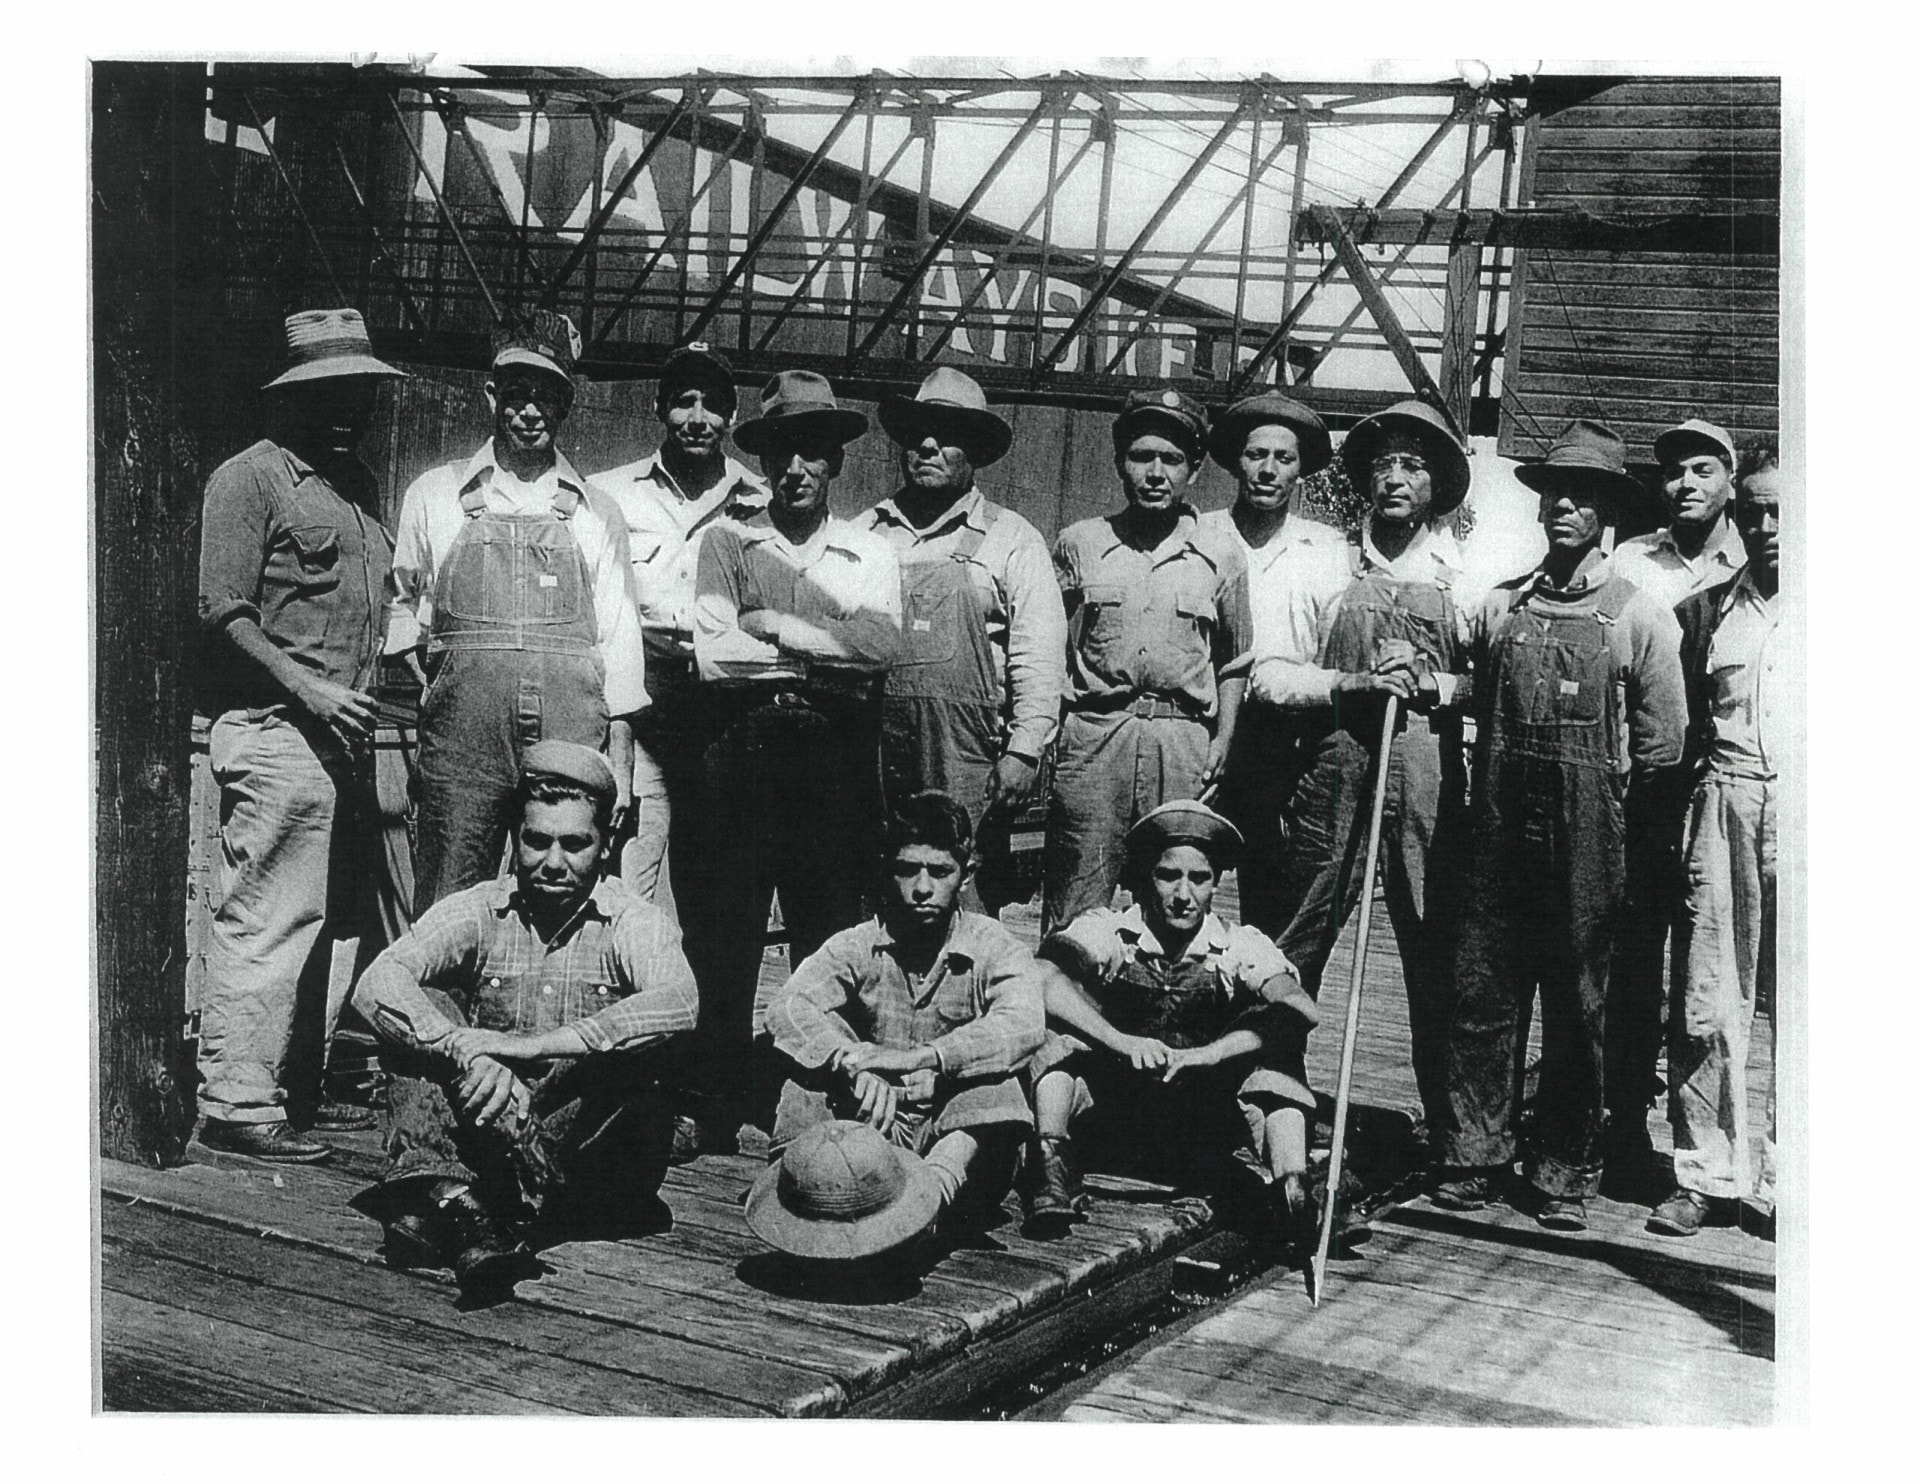 A group of Santa Fe Railway Co. workers. Some were as young as 14 years old and the majority pictured here migrated from Mexico in the 1930s-1940s to find jobs. (Courtesy: Quiroga Family)